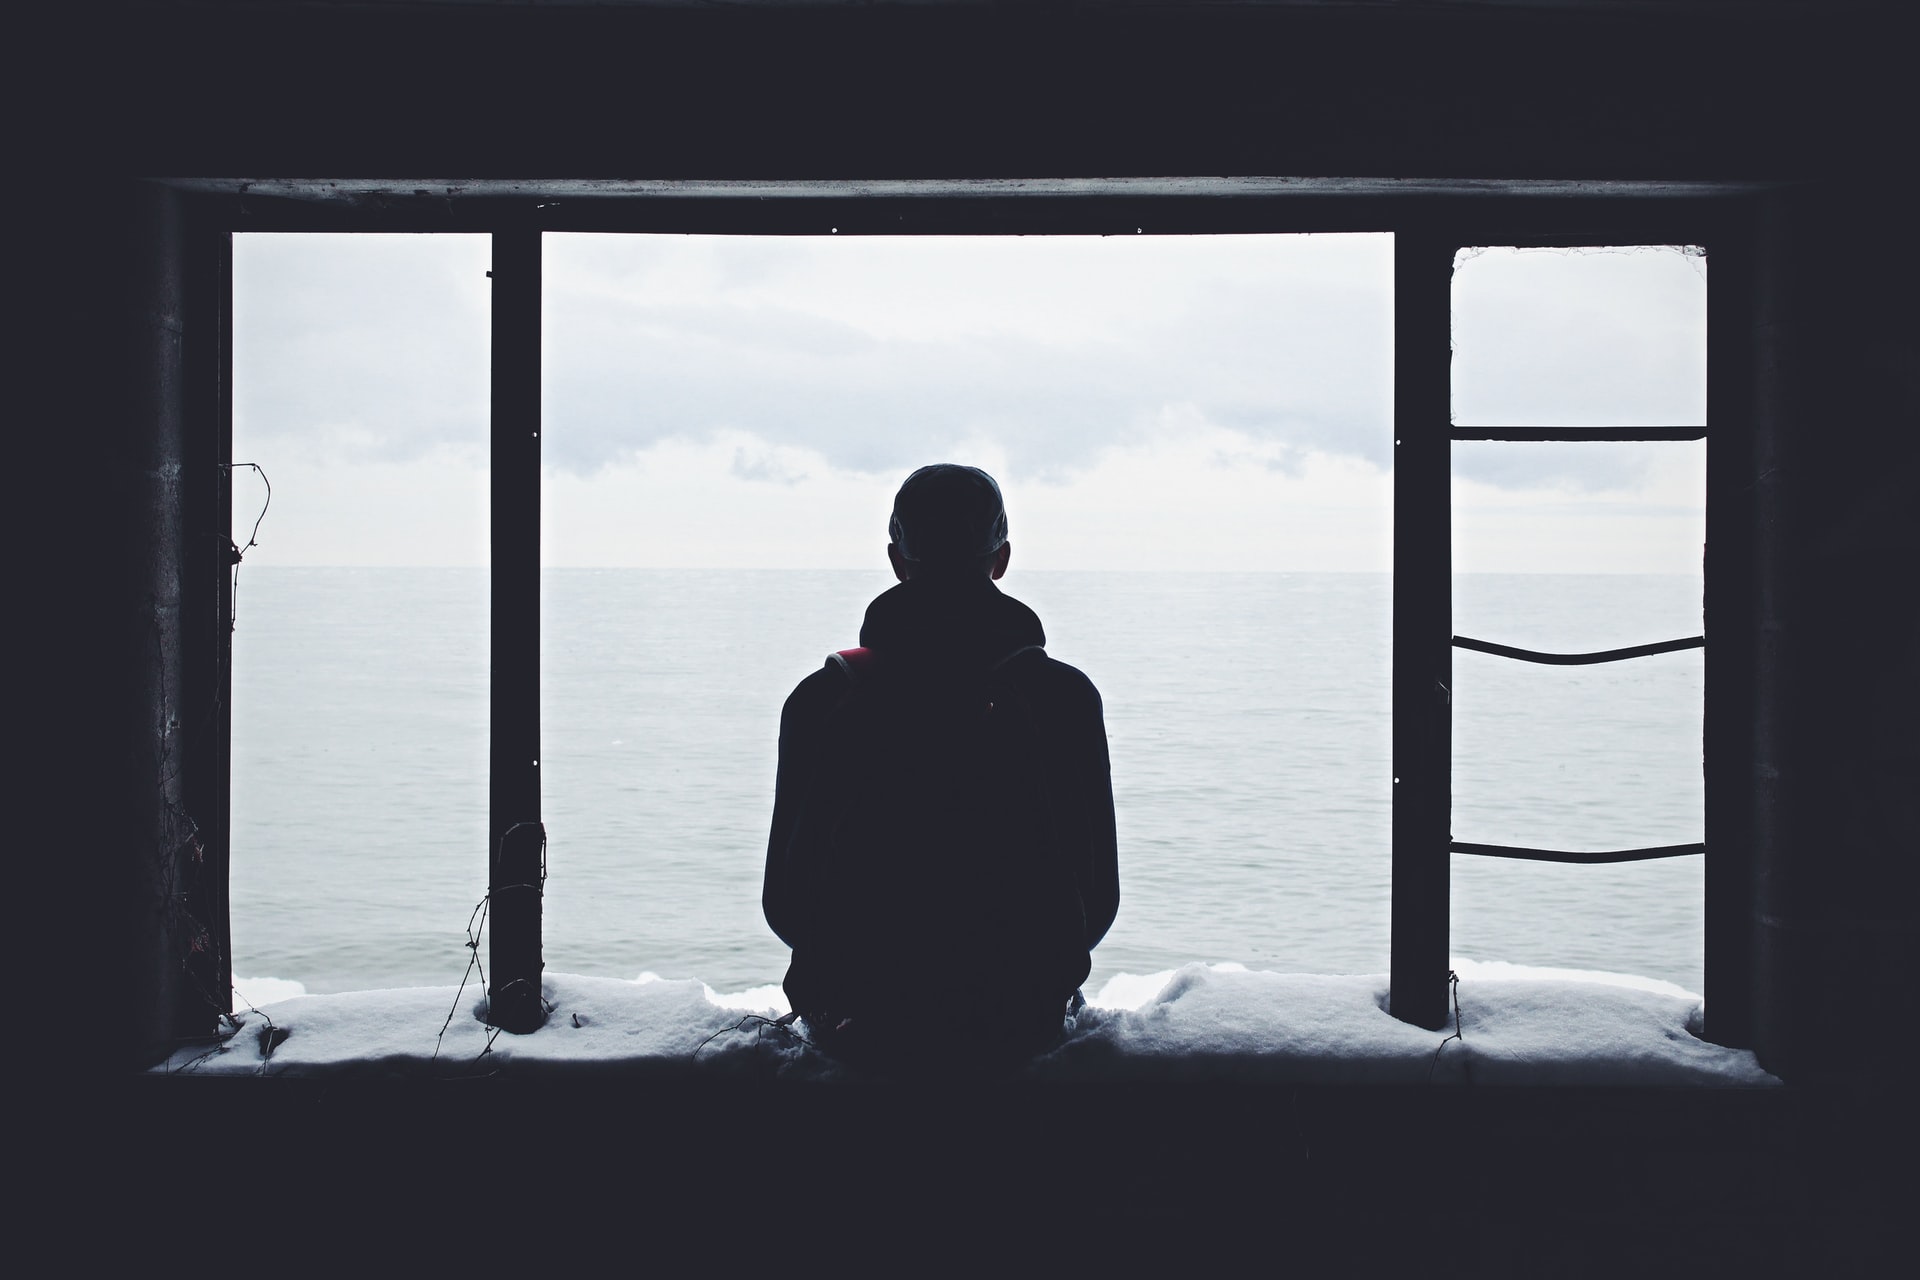 A man sitting on a window sill overlooking the ocean